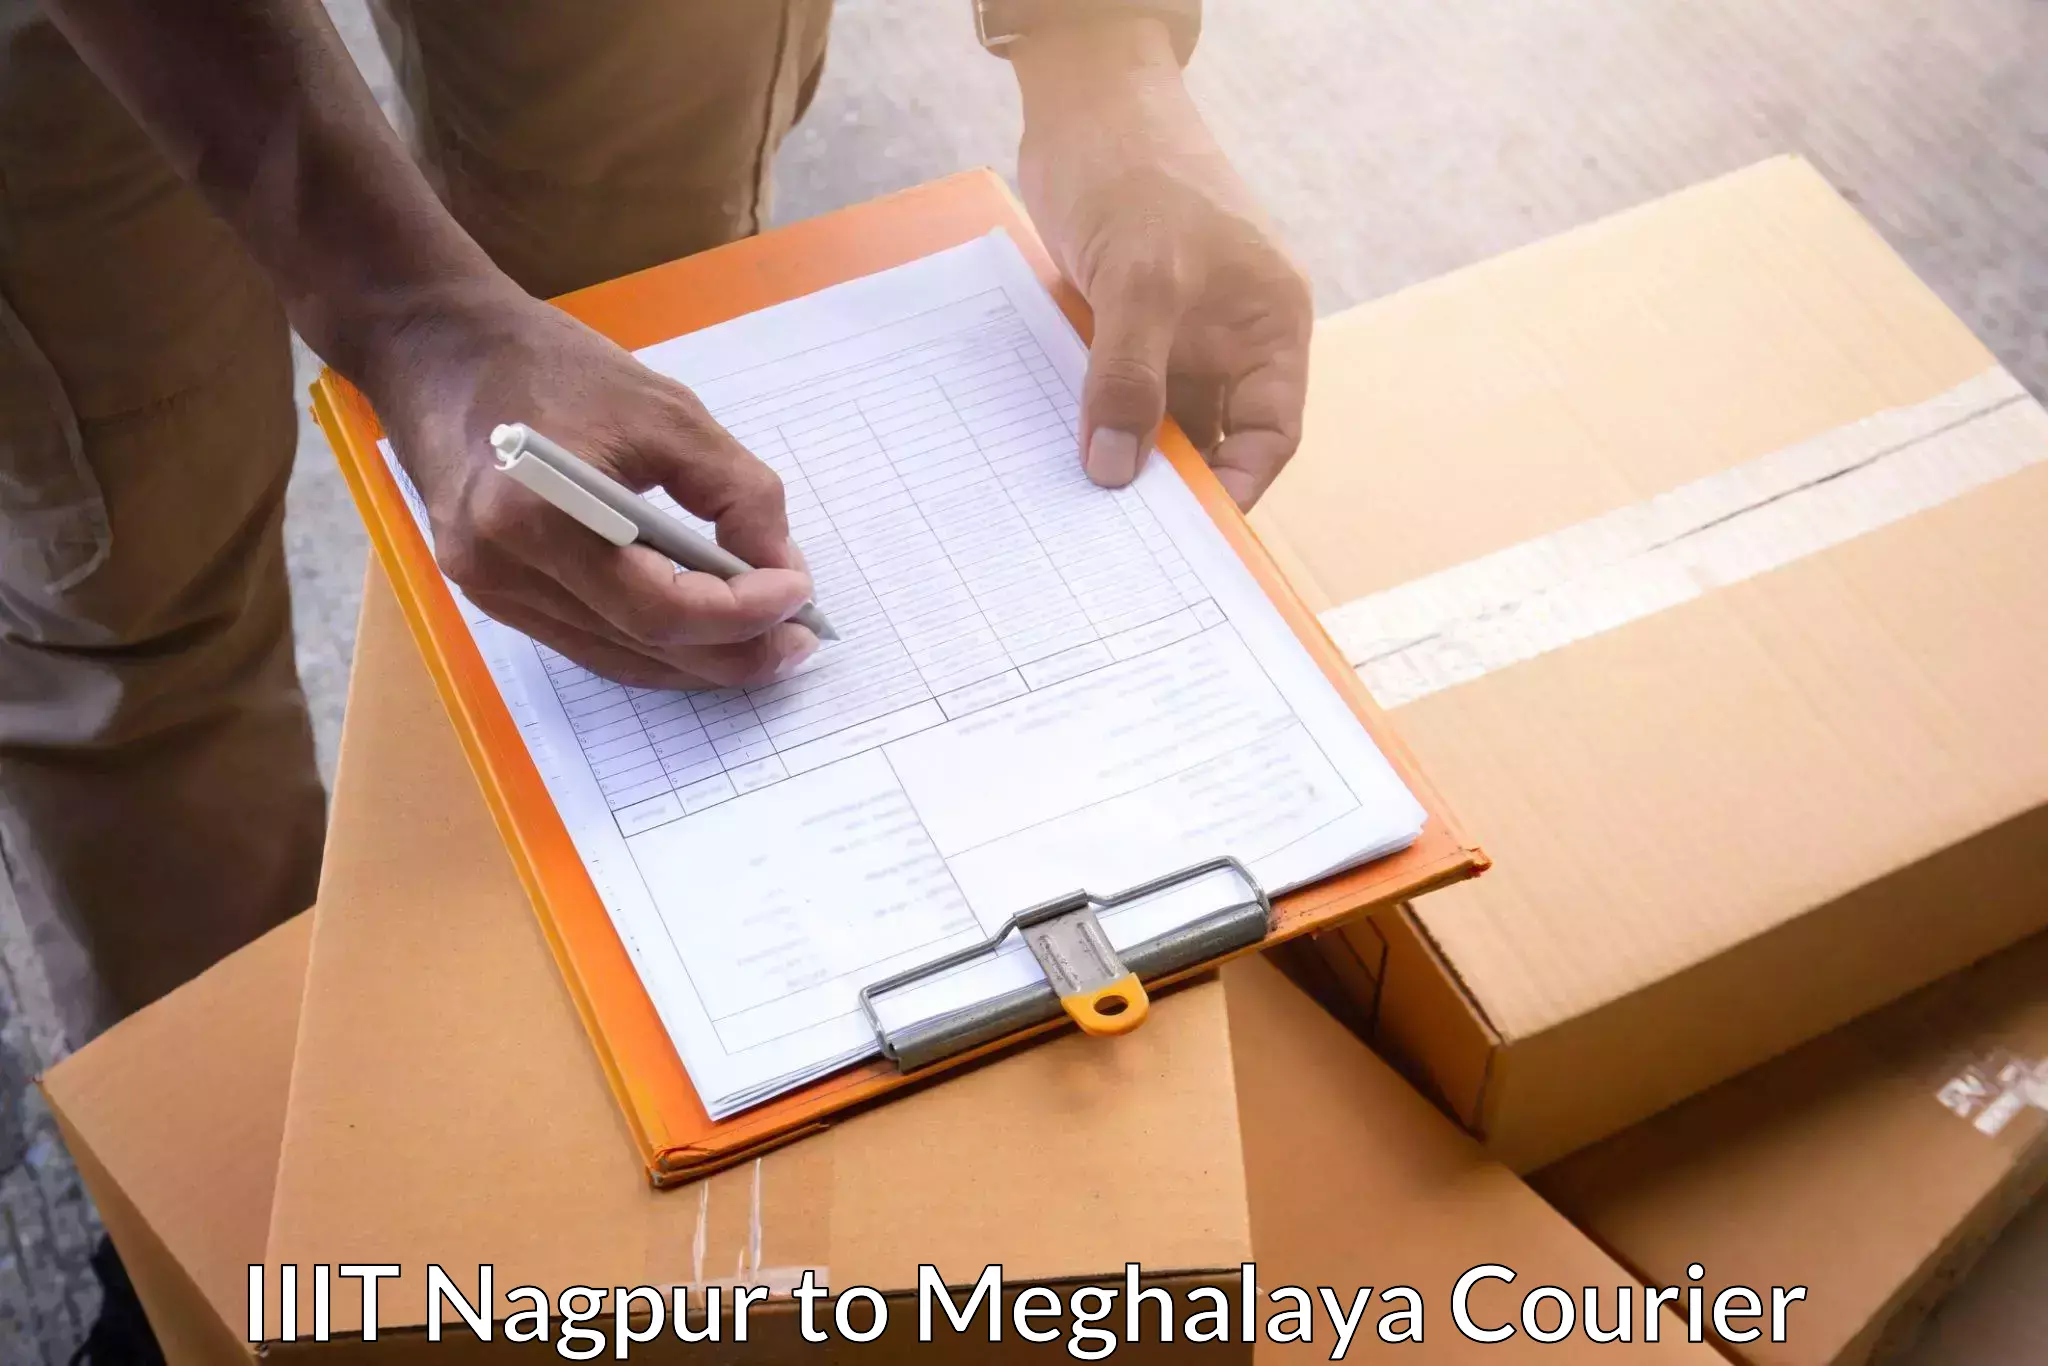 Affordable logistics services IIIT Nagpur to Shillong